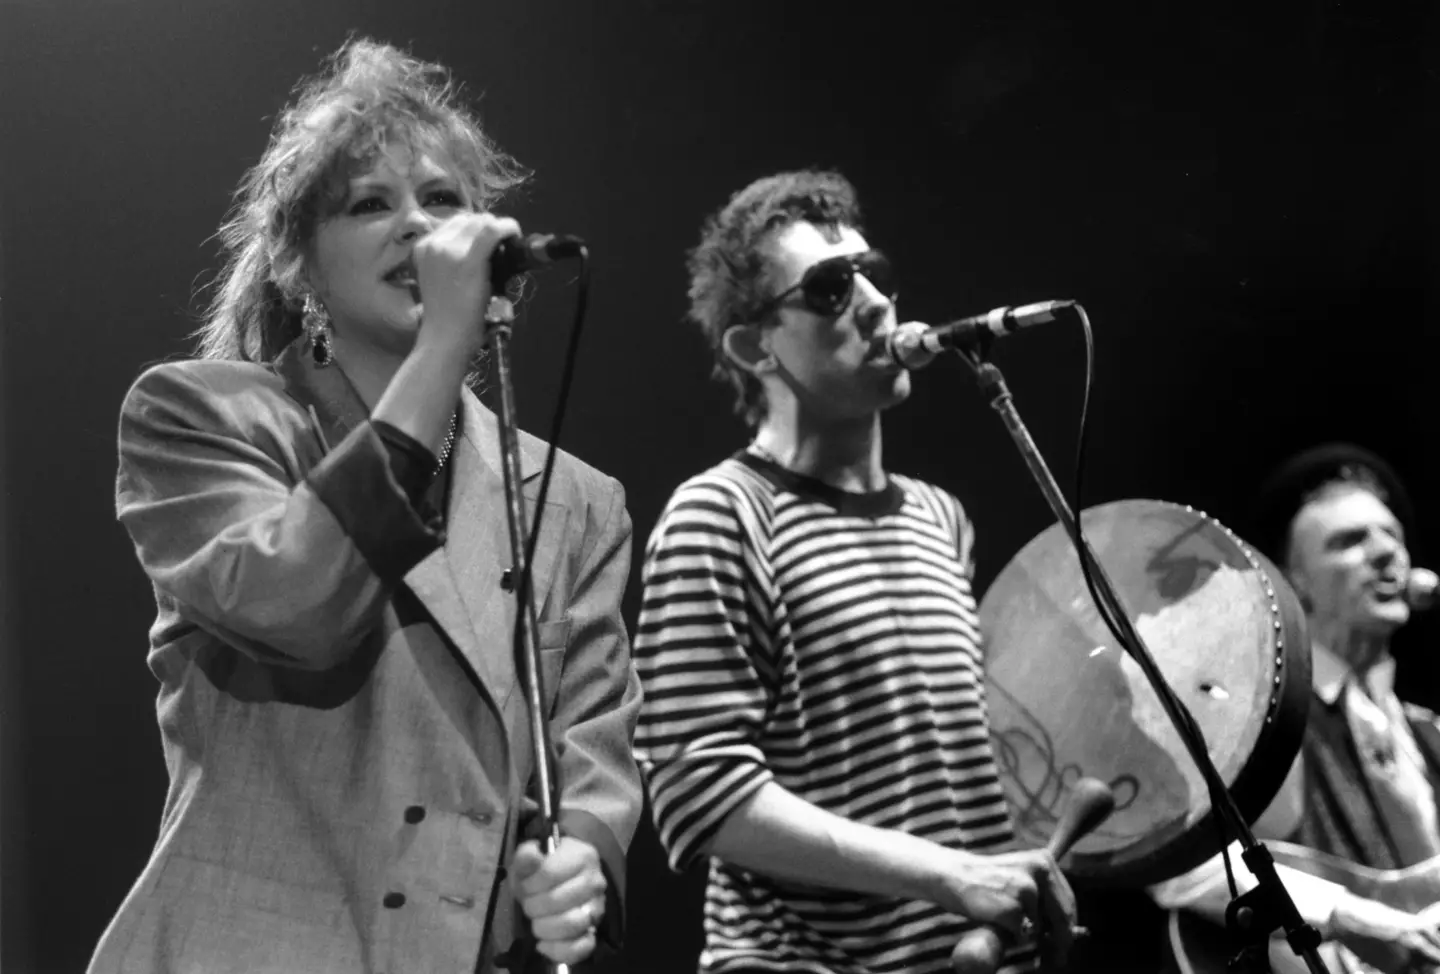 Shane Macgowan performing with Kirsty McCall.